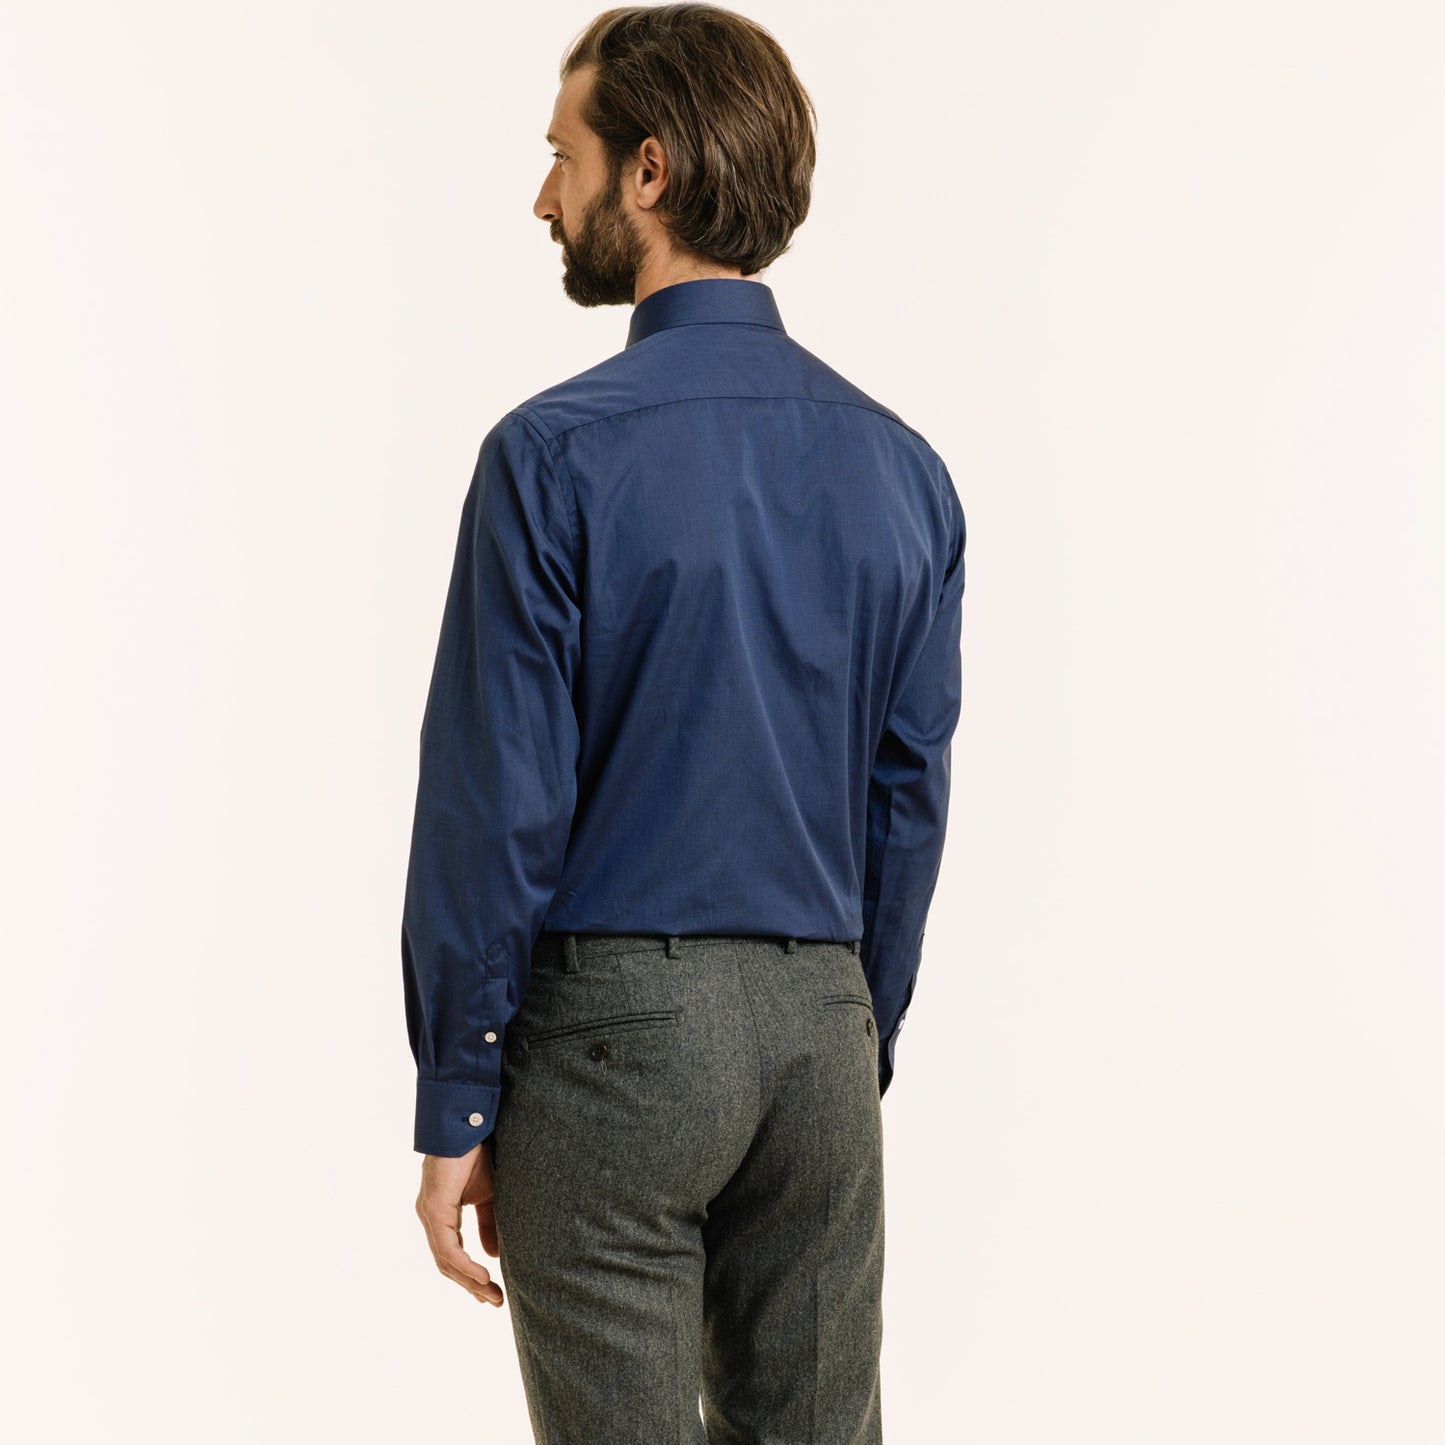 Midnight blue double-twisted thread-on-fil shirt